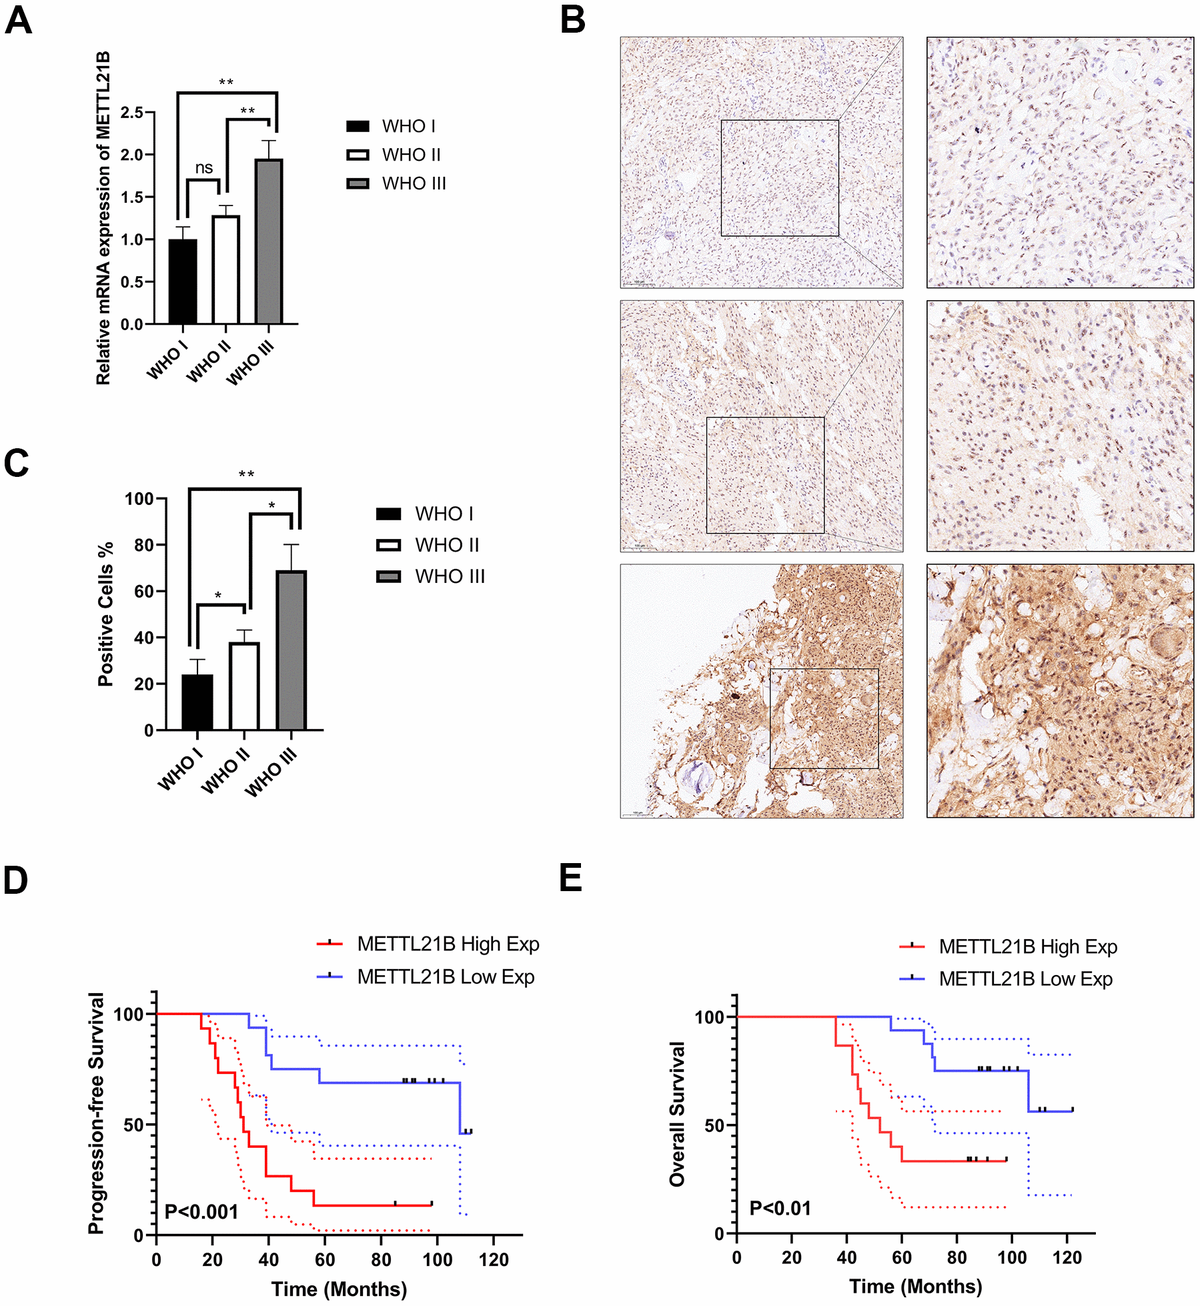 Experimental examination of METTL21B expression and prognosis analysis in LGG patient clinical samples. (A) The relative mRNA expression level in LGG with different WHO grades. (B) Representative immunohistochemistry images for METTL21B in LGG with different WHO grades. Positive cells showed nuclear and/or cytoplasmic brown staining while negative cells showed blue nuclei counter staining. (C) METTL21B positive cells were counted in LGG with different WHO grades. *PD, E) METTL21B high expression predicts a worse progression-free and overall survival (P